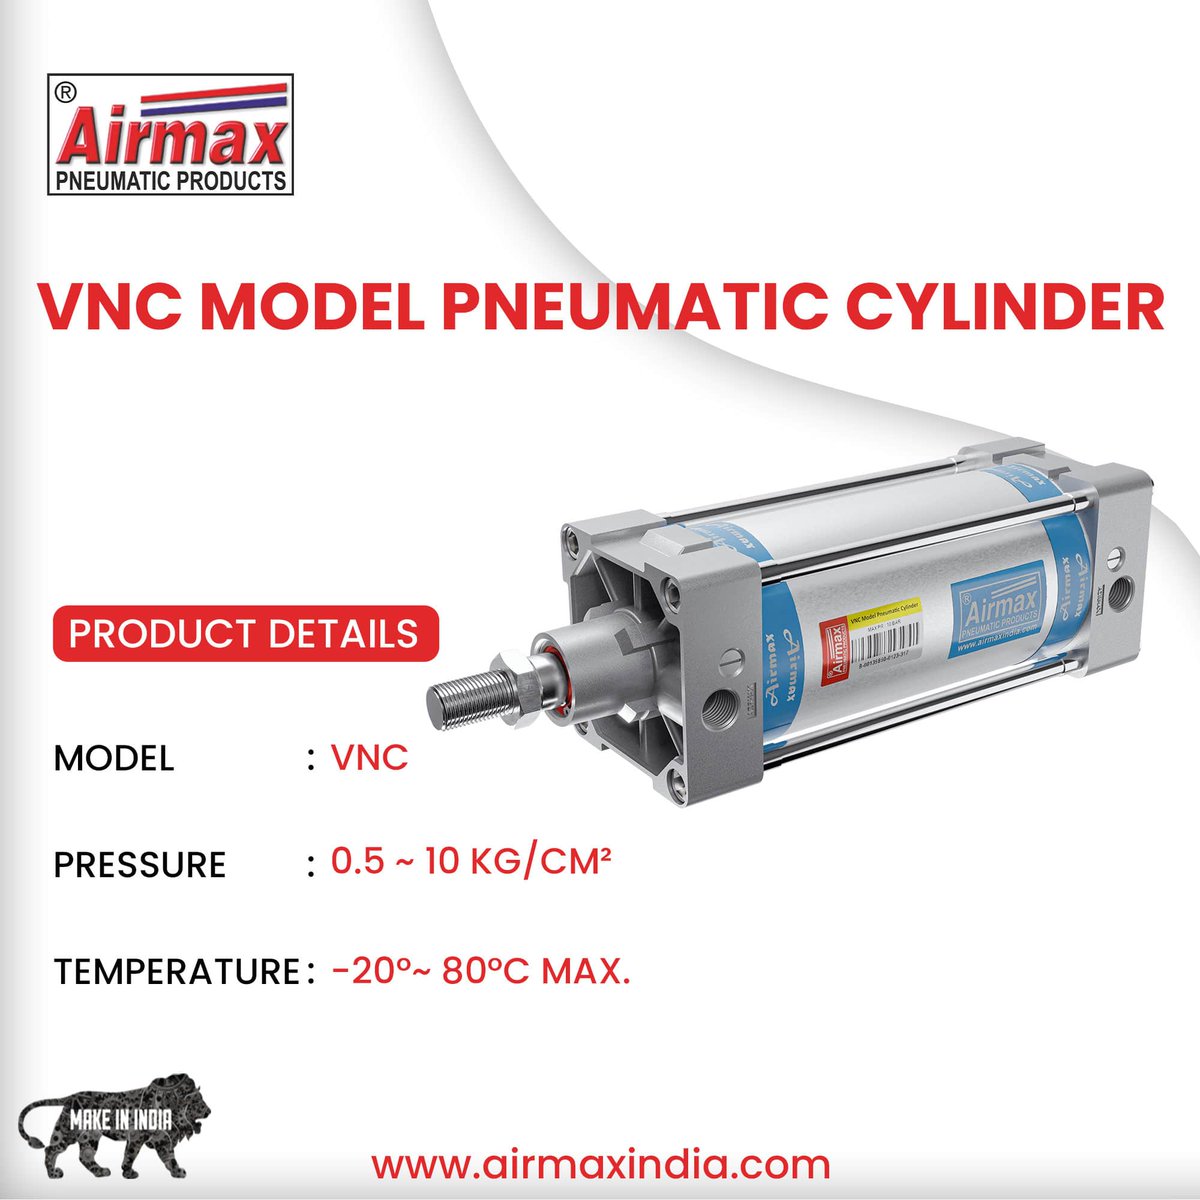 Reliability meets performance: VNC Model Cylinders from Airmax Pneumatic. Pressure range: 0.5-10 kg/cm². Improve your performance today! 💪

#airmaxpneumatics #Manufacturer #Exporter #Technology #MakeInIndia #G20 #India #Viral #trending #instagram #post #explore